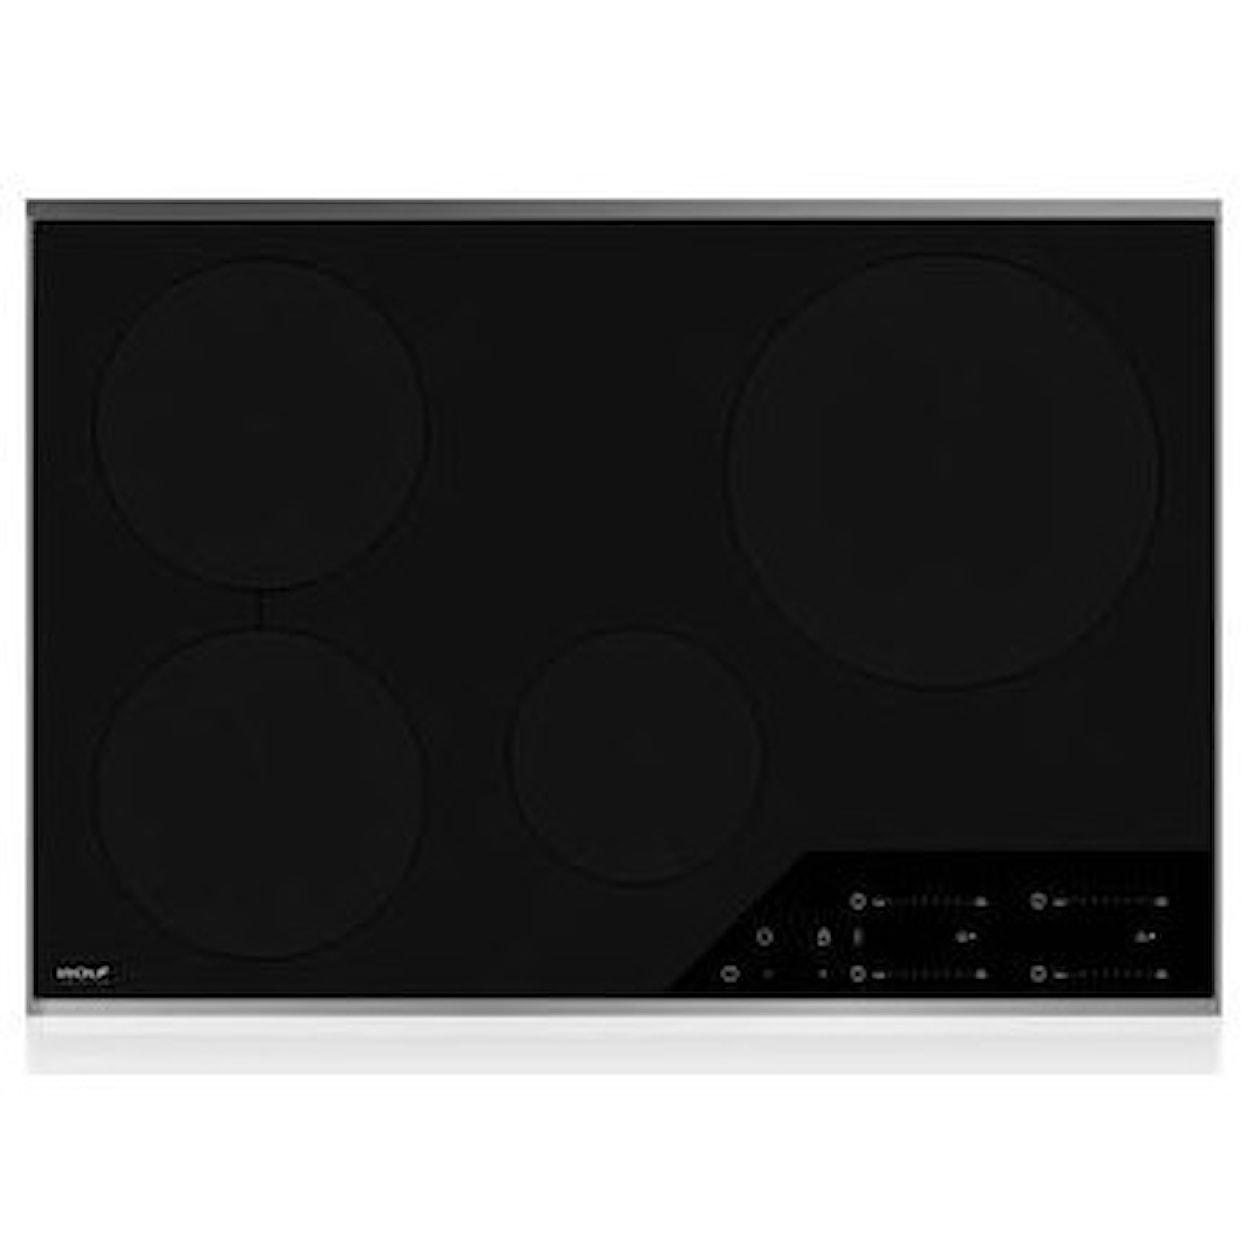 Wolf Induction Cooktop 30" Transitional Induction Cooktop